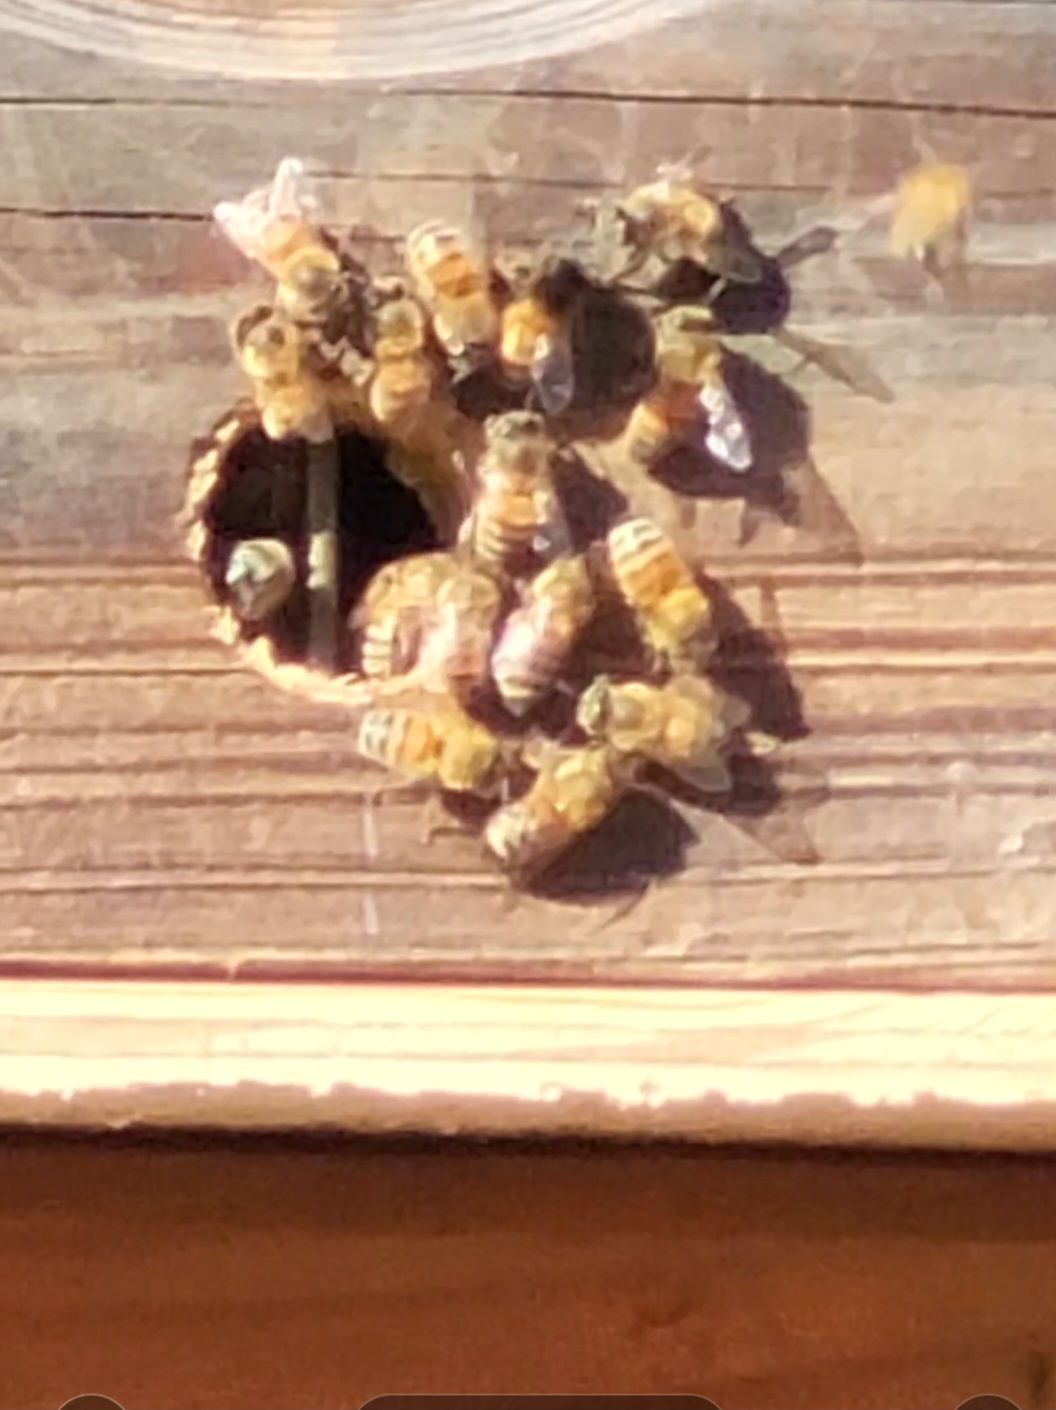 Photo of the bees